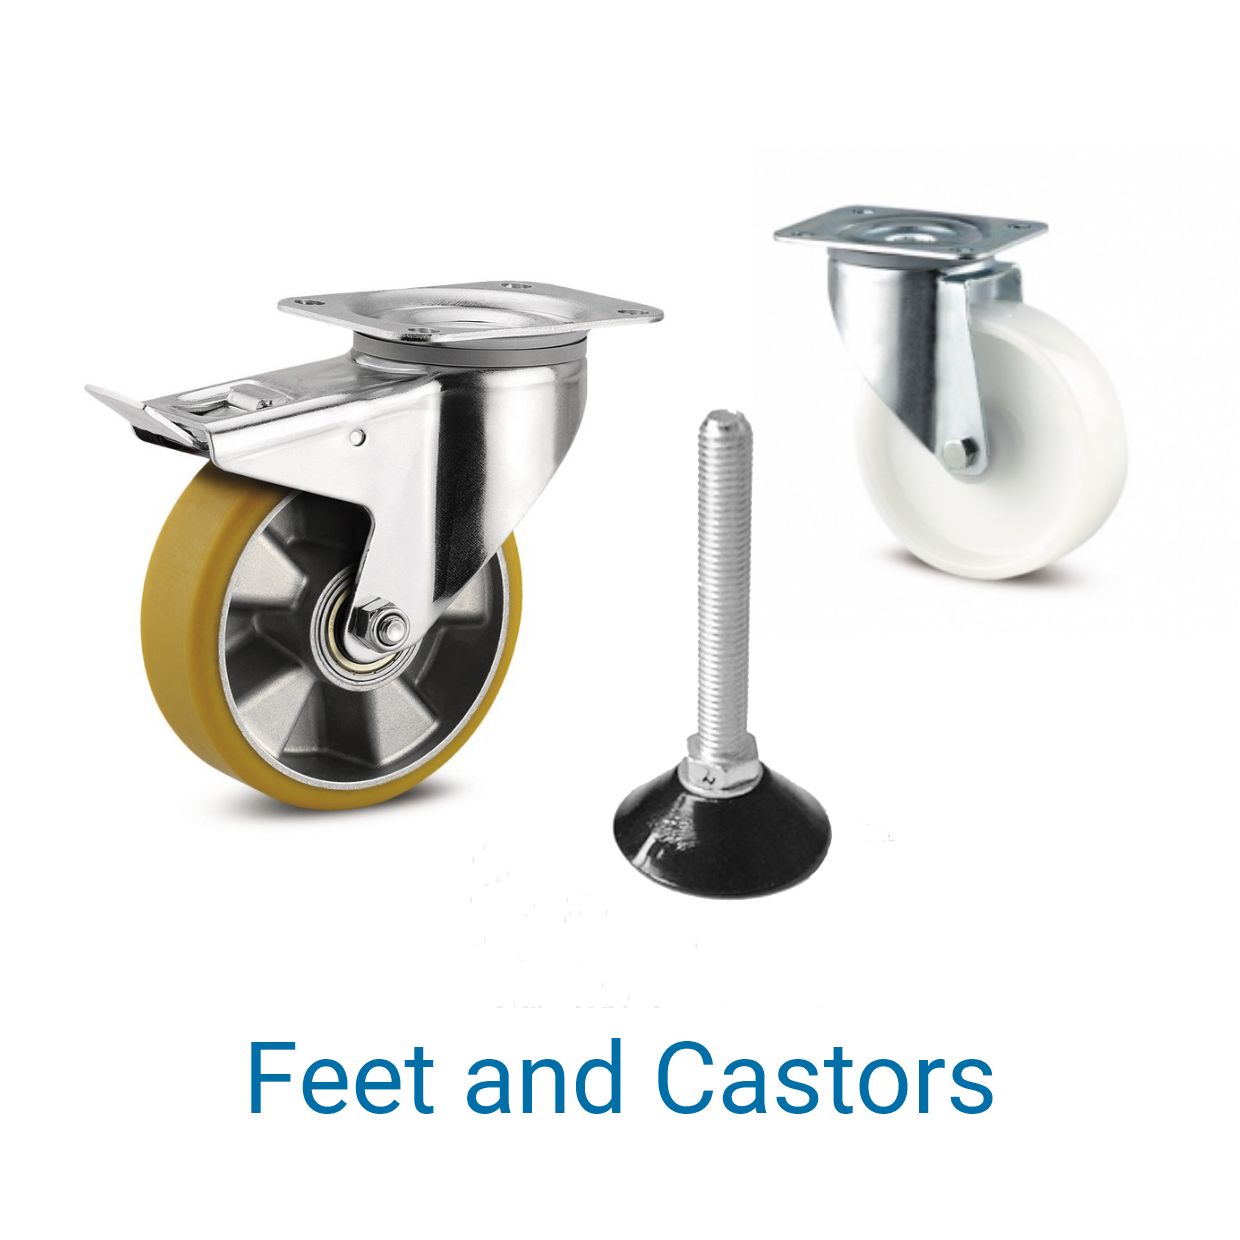 Feet and Castors from BeeWaTec